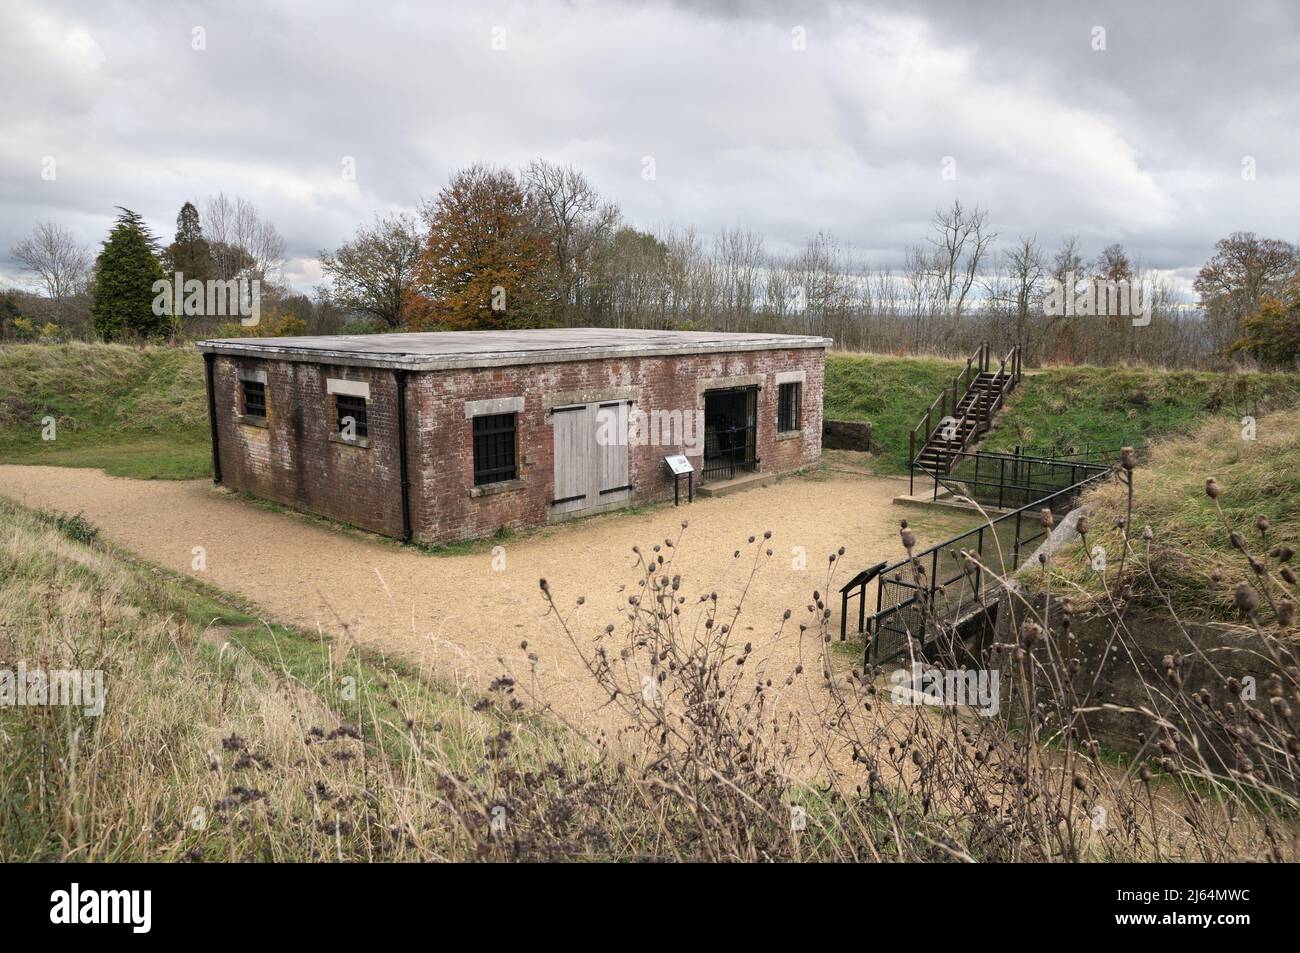 The Tool Store at Reigate Fort, Surrey, built for equipment and ammunition storage. Reigate Fort was built 1898 as part of the London Defence Scheme. Stock Photo